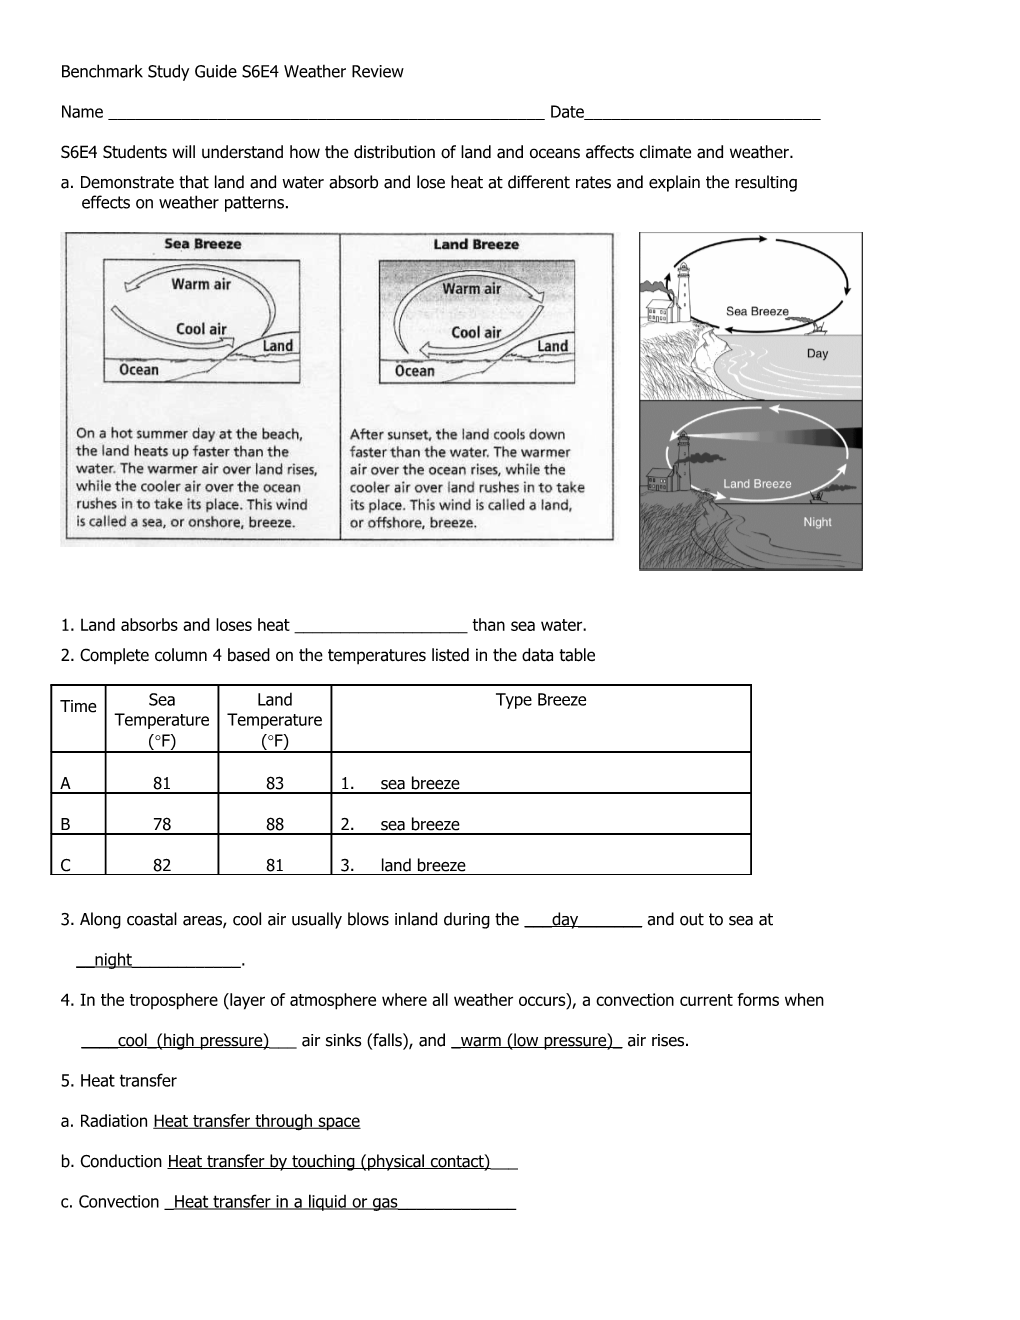 Benchmark Study Guides6e4 Weather Review